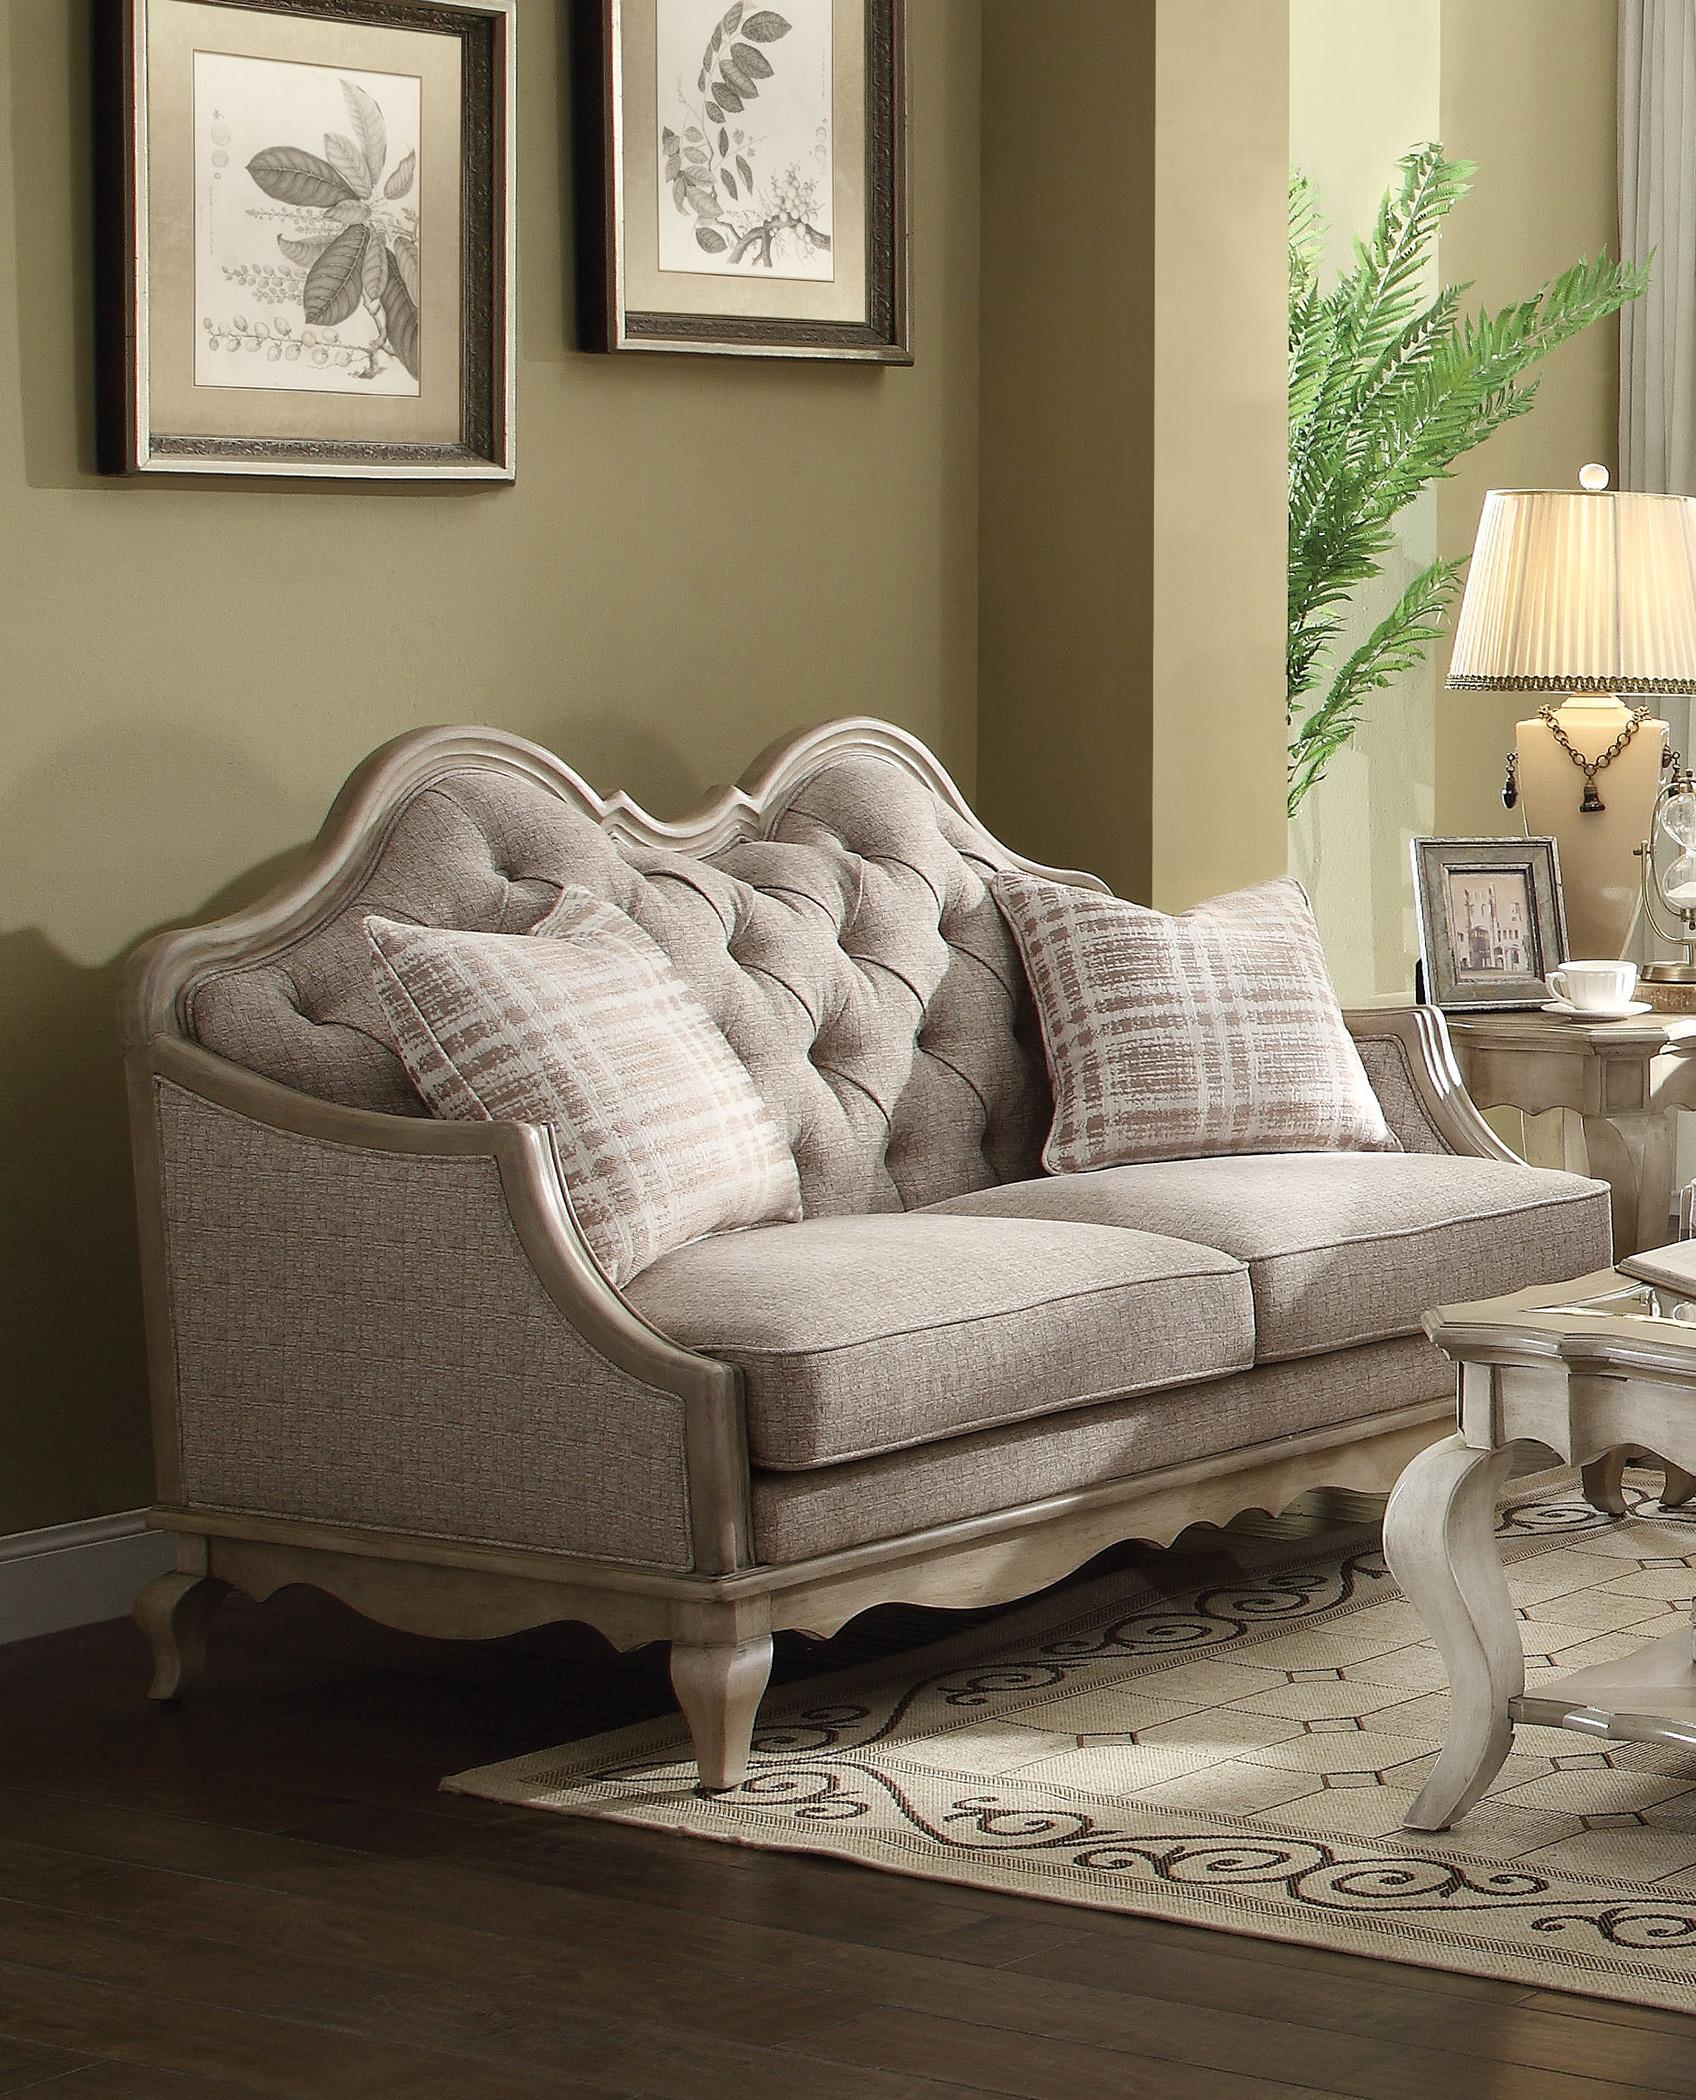 Classic, Traditional Loveseat Chelmsford-56051 Chelmsford-56051 in Taupe, Beige Fabric